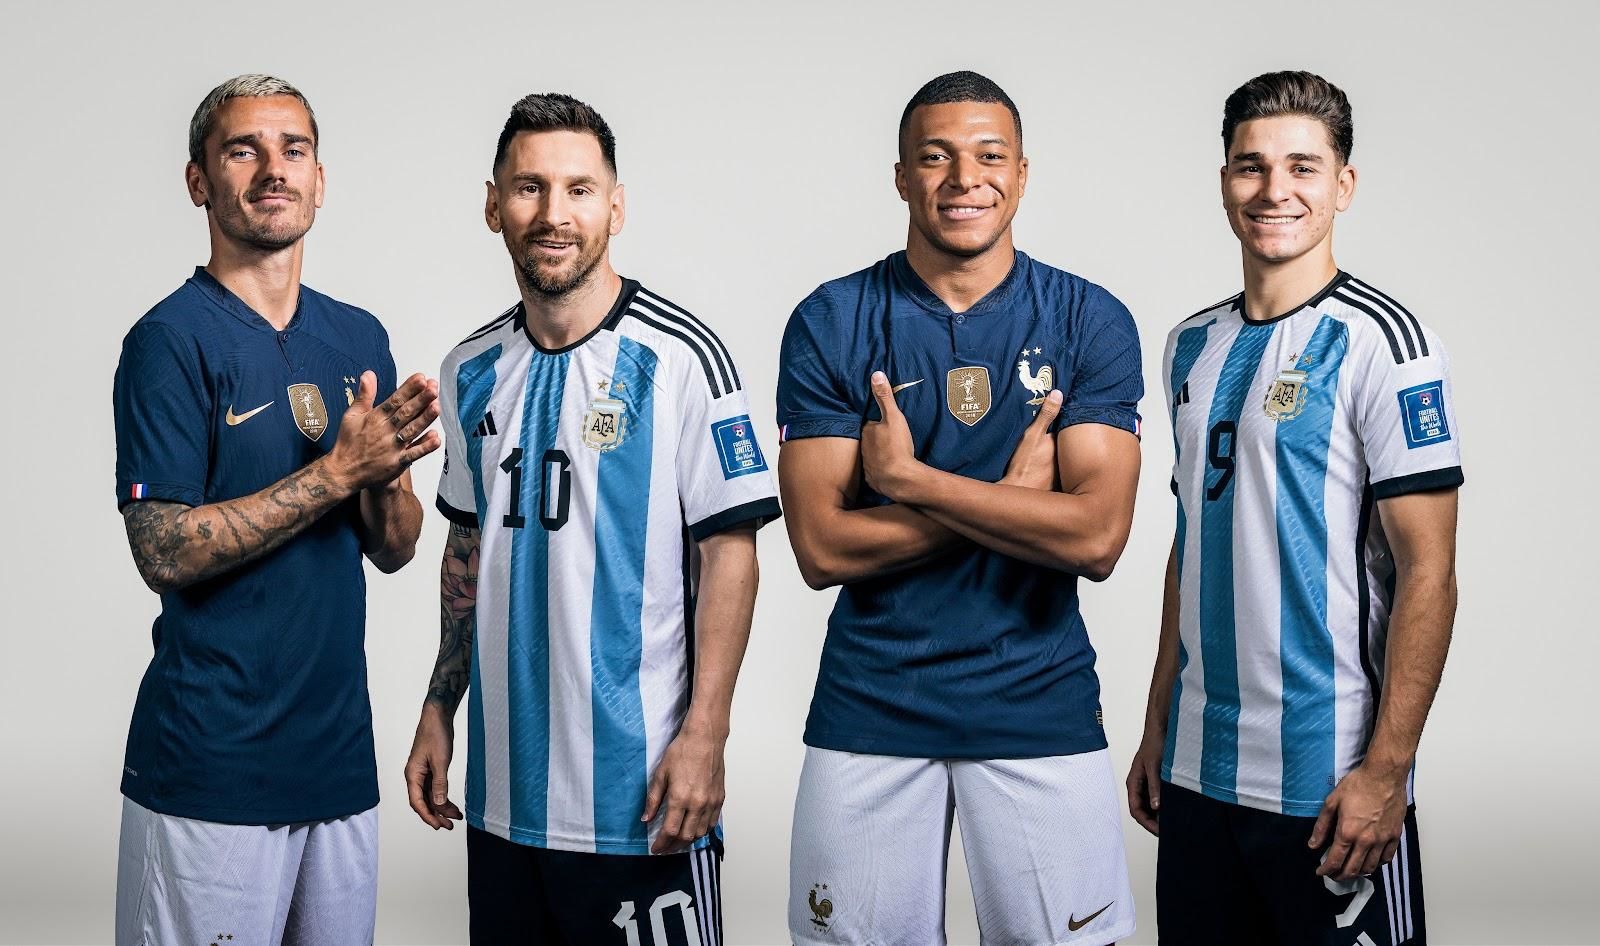 Argentina vs France, December 18: Head-to-Head Statistics, Line-ups, Prediction for the 2022 World Cup Match